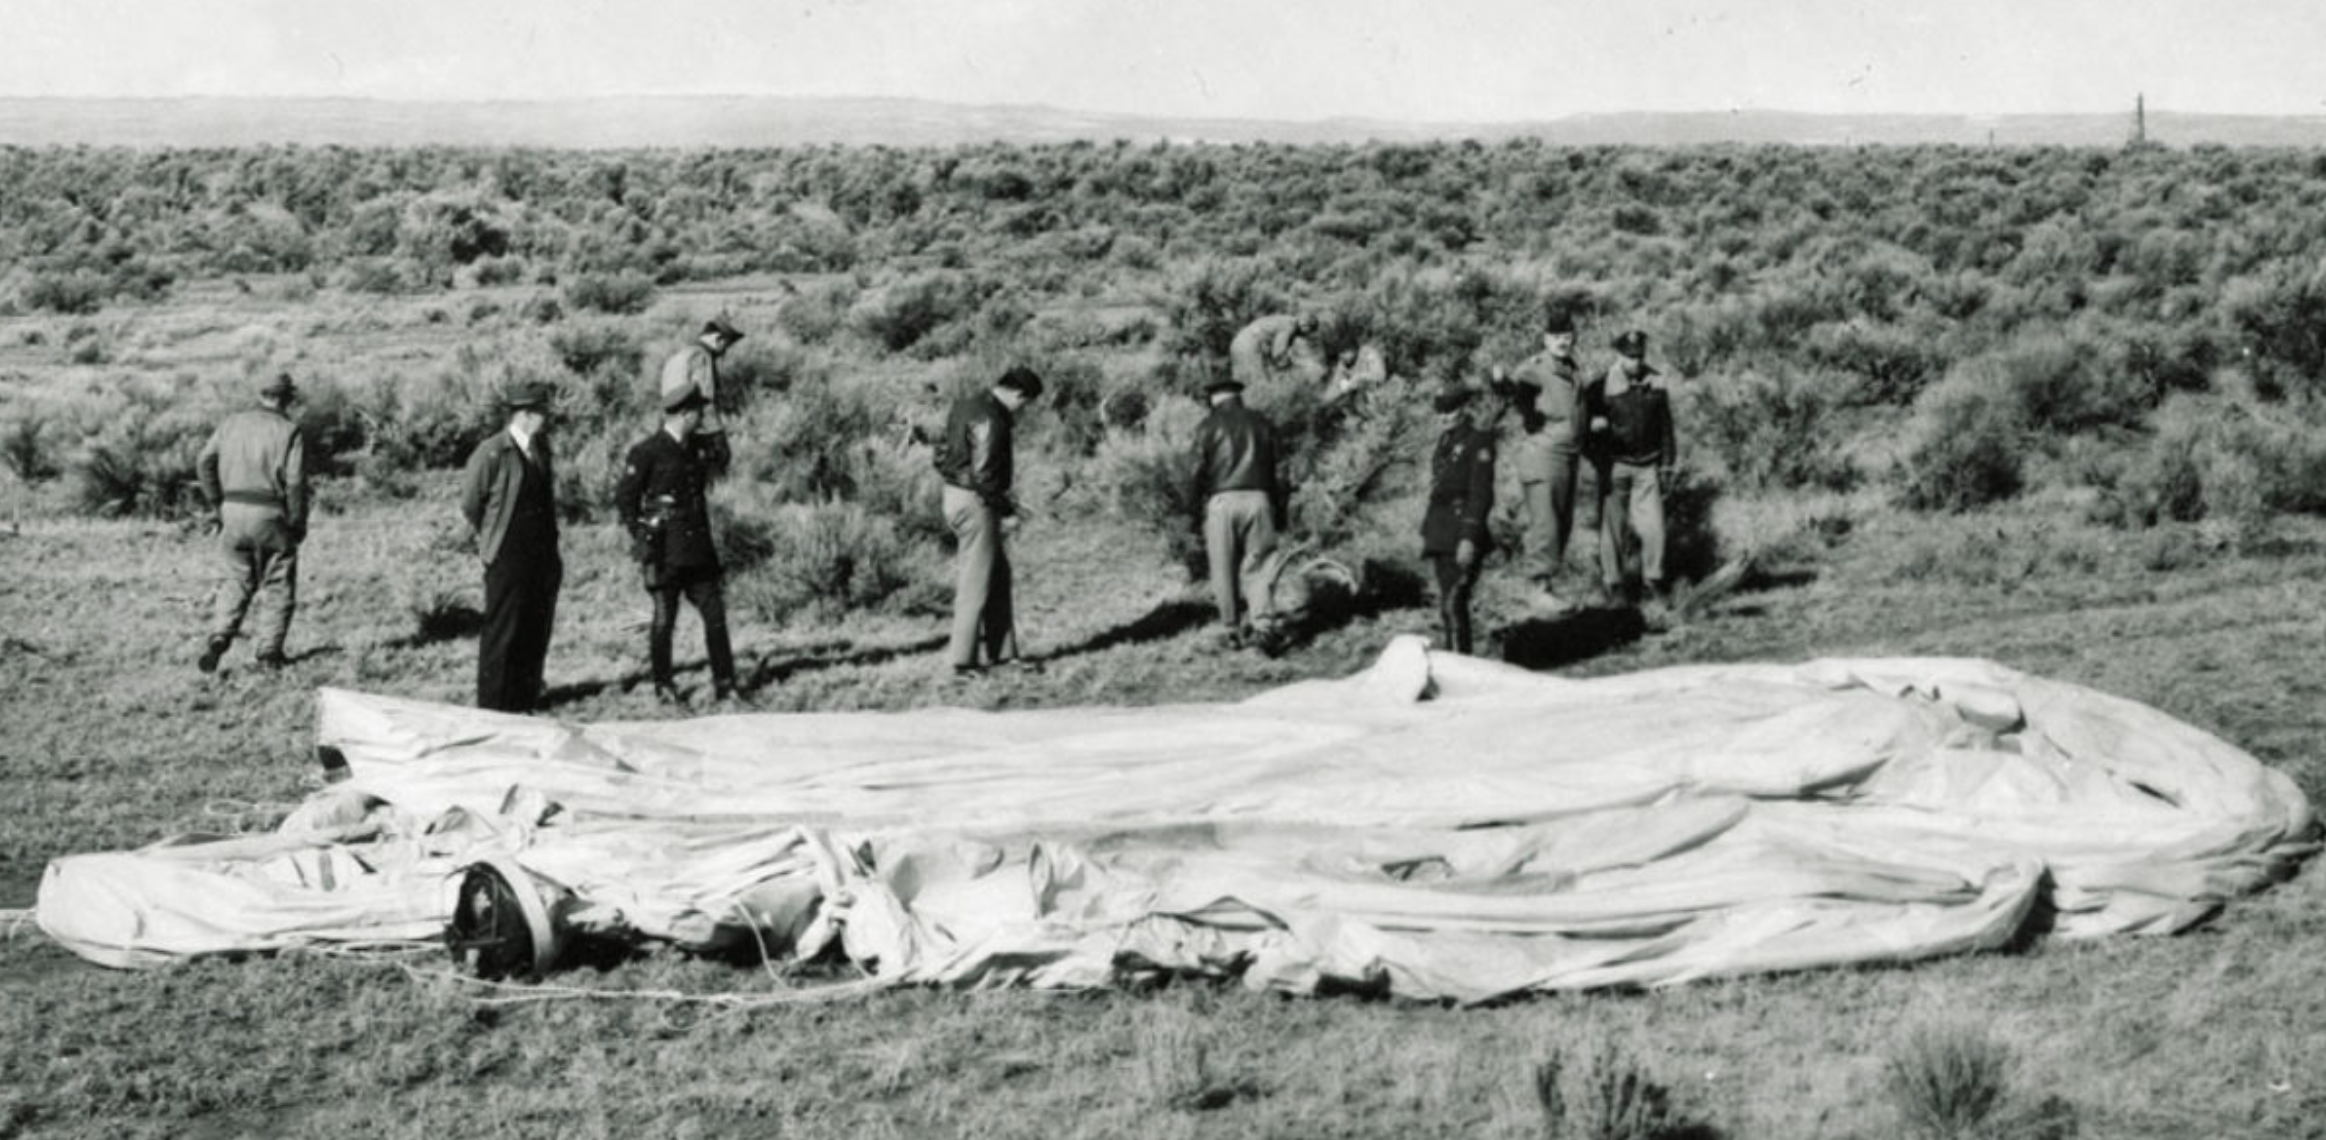 American military and government officials congregate around a deflated but complete Japanese balloon bomb discovered near Burns, Oregon, on February 23, 1945. (U.S. Air Force/National Archives)